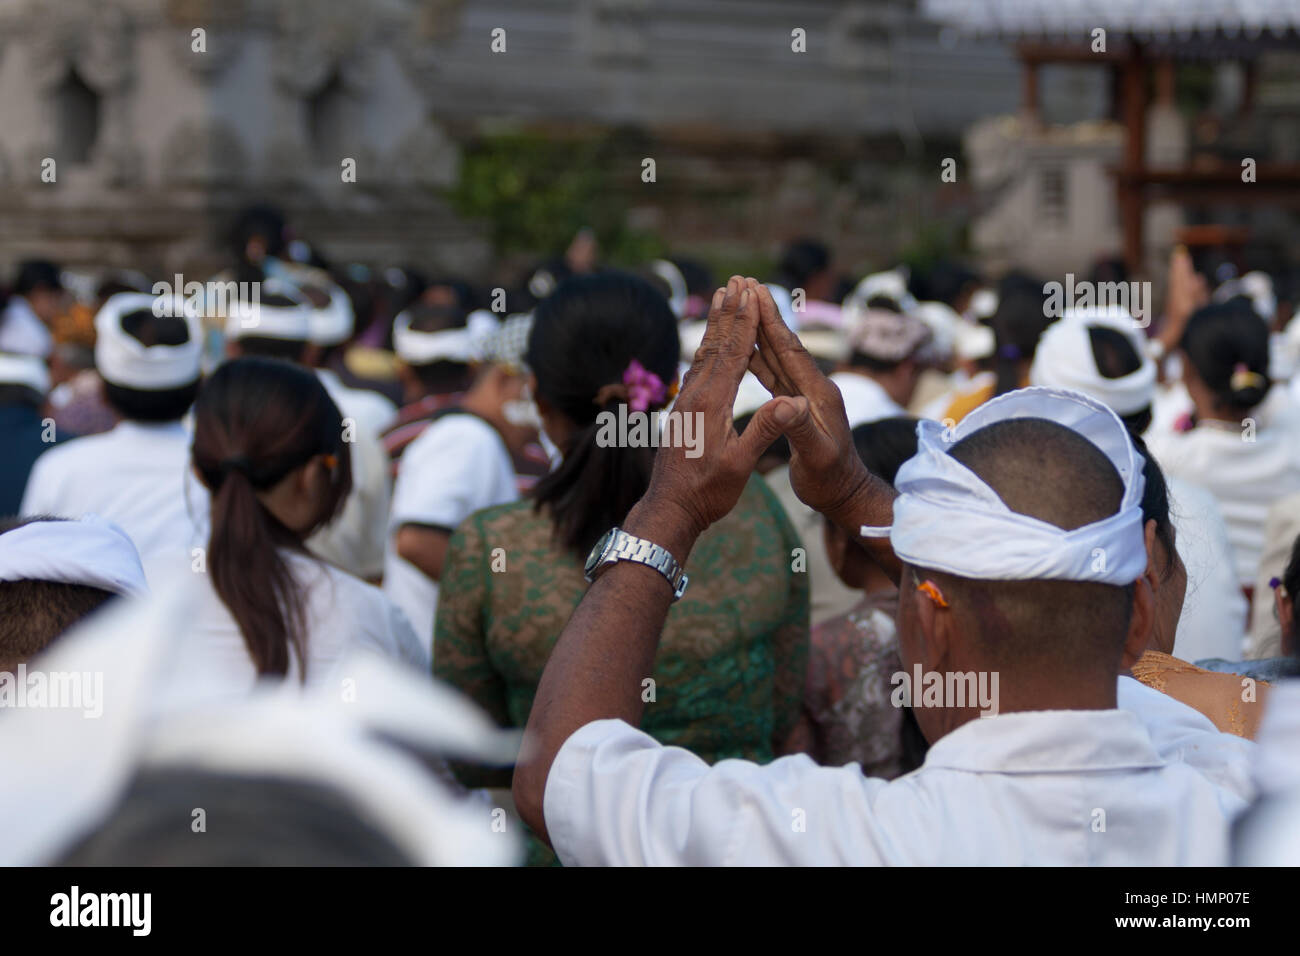 People praying in the temple during the Galungan festival in Bali, Indonesia Stock Photo